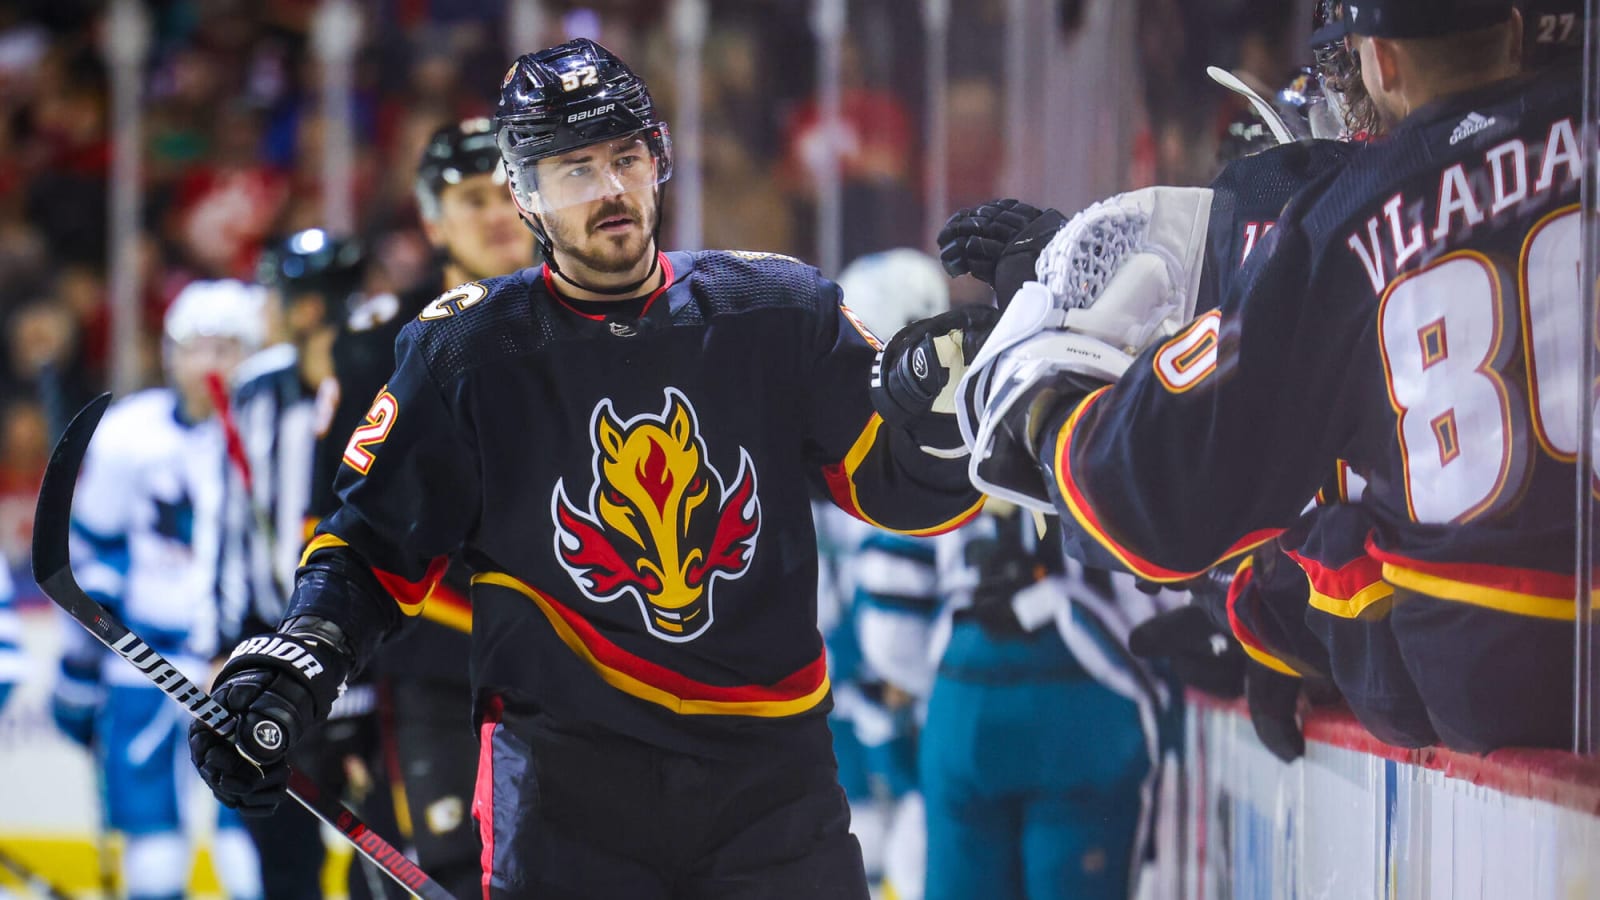 Looking at the Calgary Flames’ current defensive depth chart